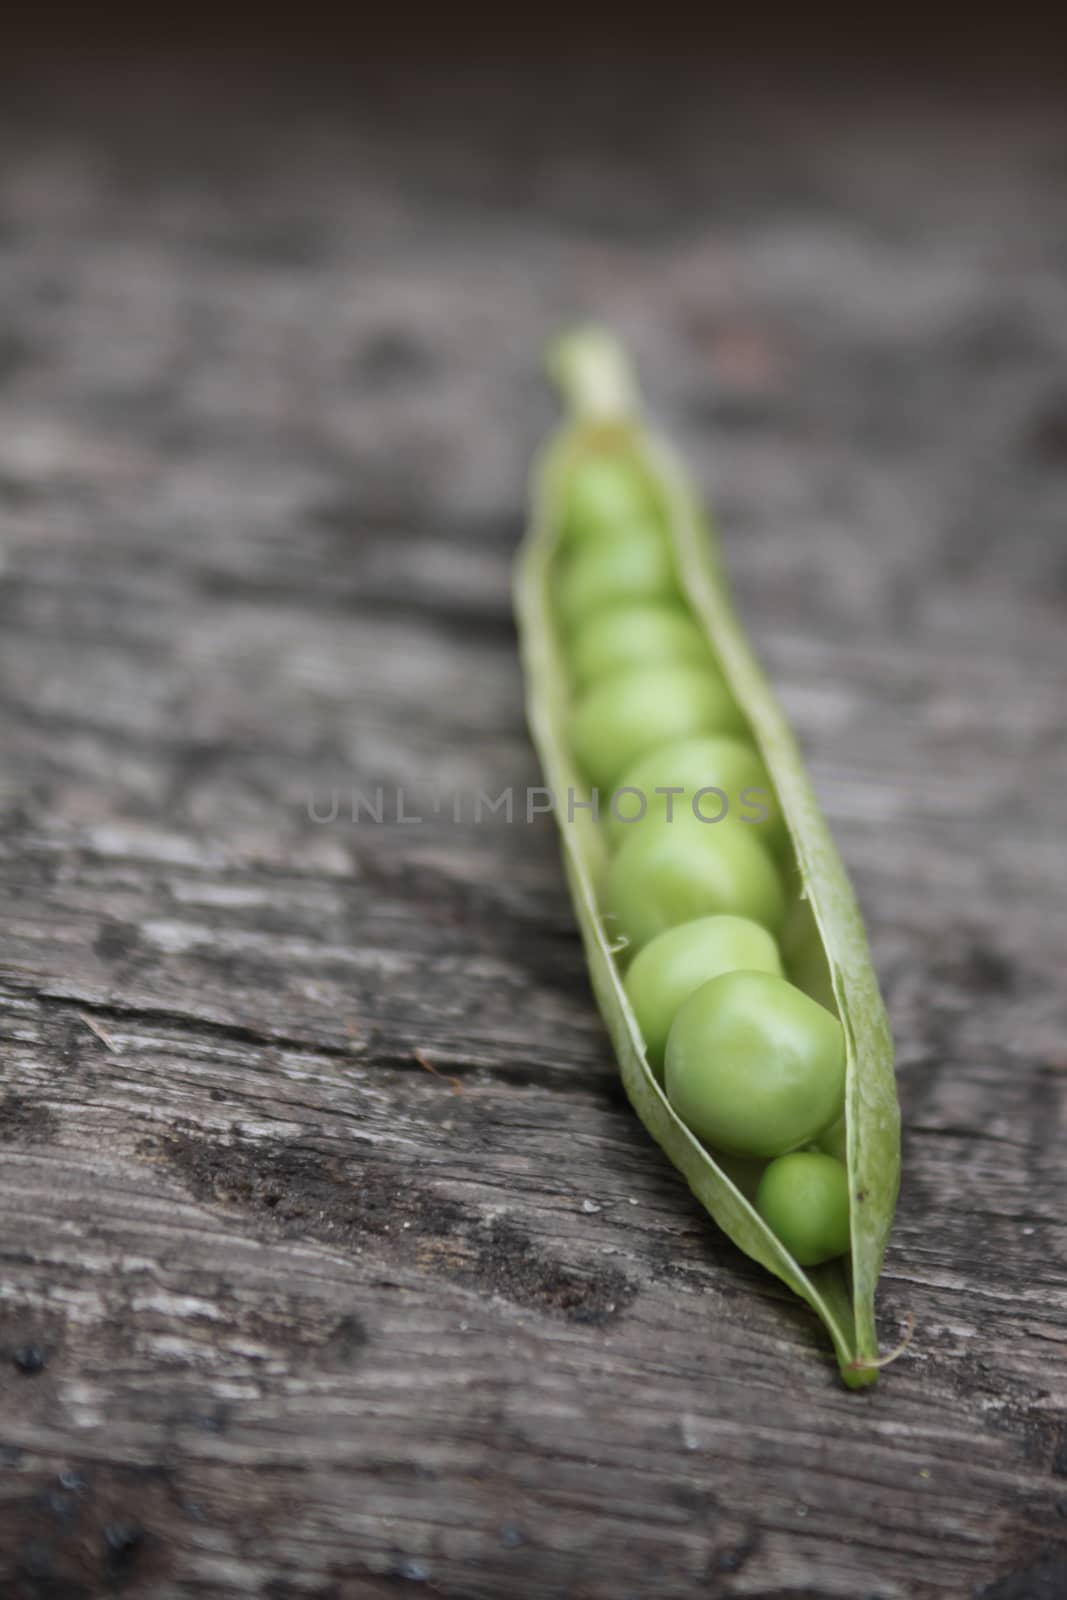 A close up view of a single pea pod with its peas exposed to view. Set on a portrait format on a wooden base.